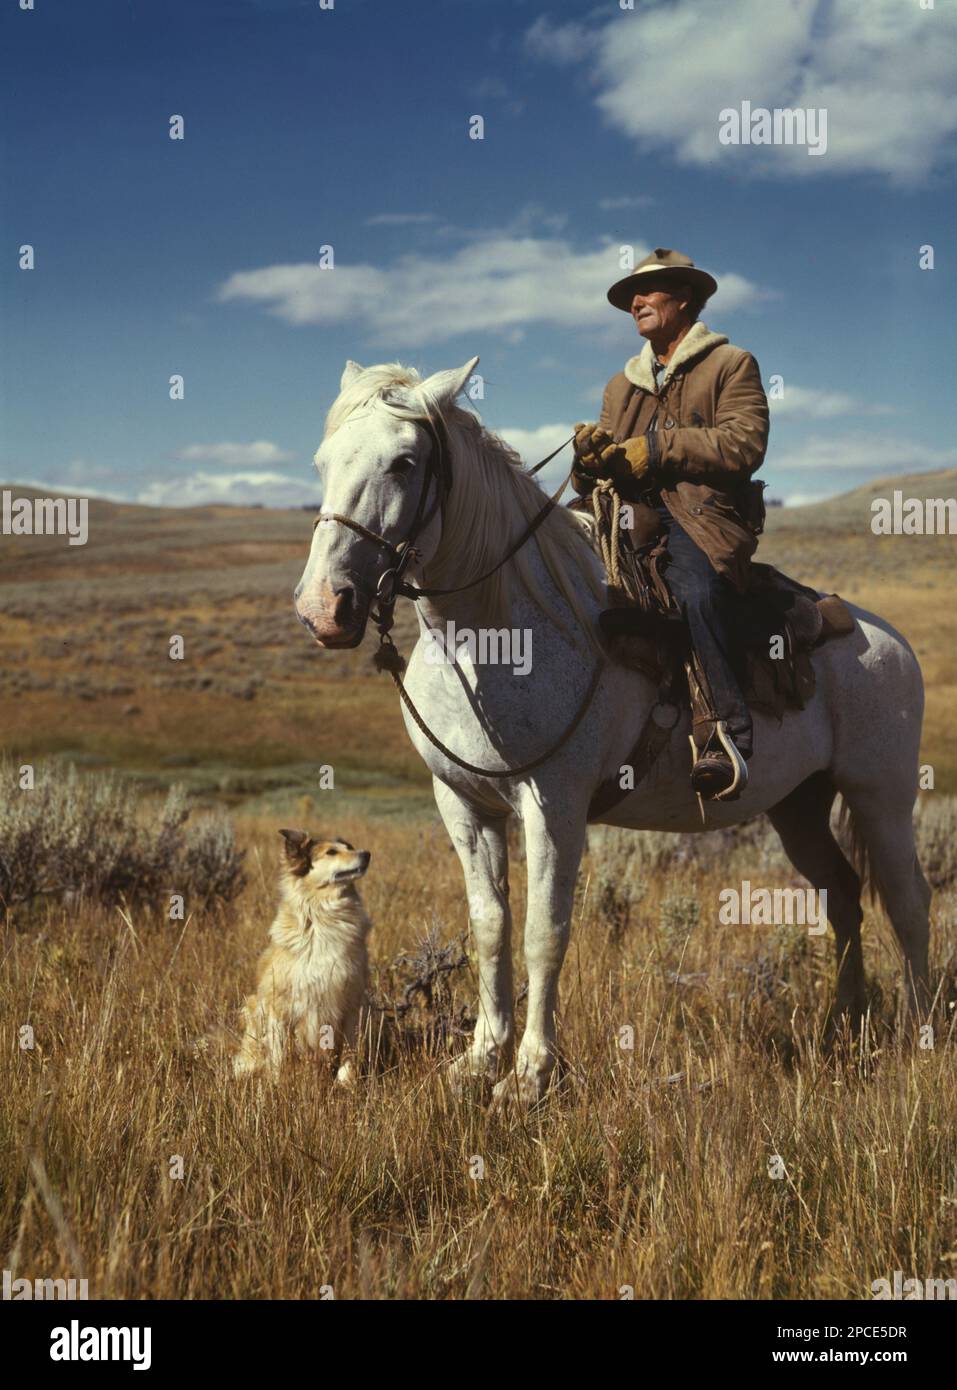 1942 , august , MONTANA , USA : Shepherd with his horse and dog on Gravelly Range, Madison County, Montana .  Photo by american Russell LEE ( born  1903 ) for the Unired Stated U.S. Office of War Information - photographer .- UNITED STATES  - FOTO STORICHE - HISTORY - GEOGRAFIA - GEOGRAPHY - AGRICOLTURA - AGRICOLTORI - ALLEVATORI di BOVINI - ALLEVAMENTO BOVINO - COW - cowboy - CONTADINI  -  CONTADINO - cattle - cane da pastore - pet  - ANNI QUARANTA - 1940's - 40's - '40 - campagna - country - cavallo - horse - sky - cielo  -   ----   Archivio GBB Stock Photo